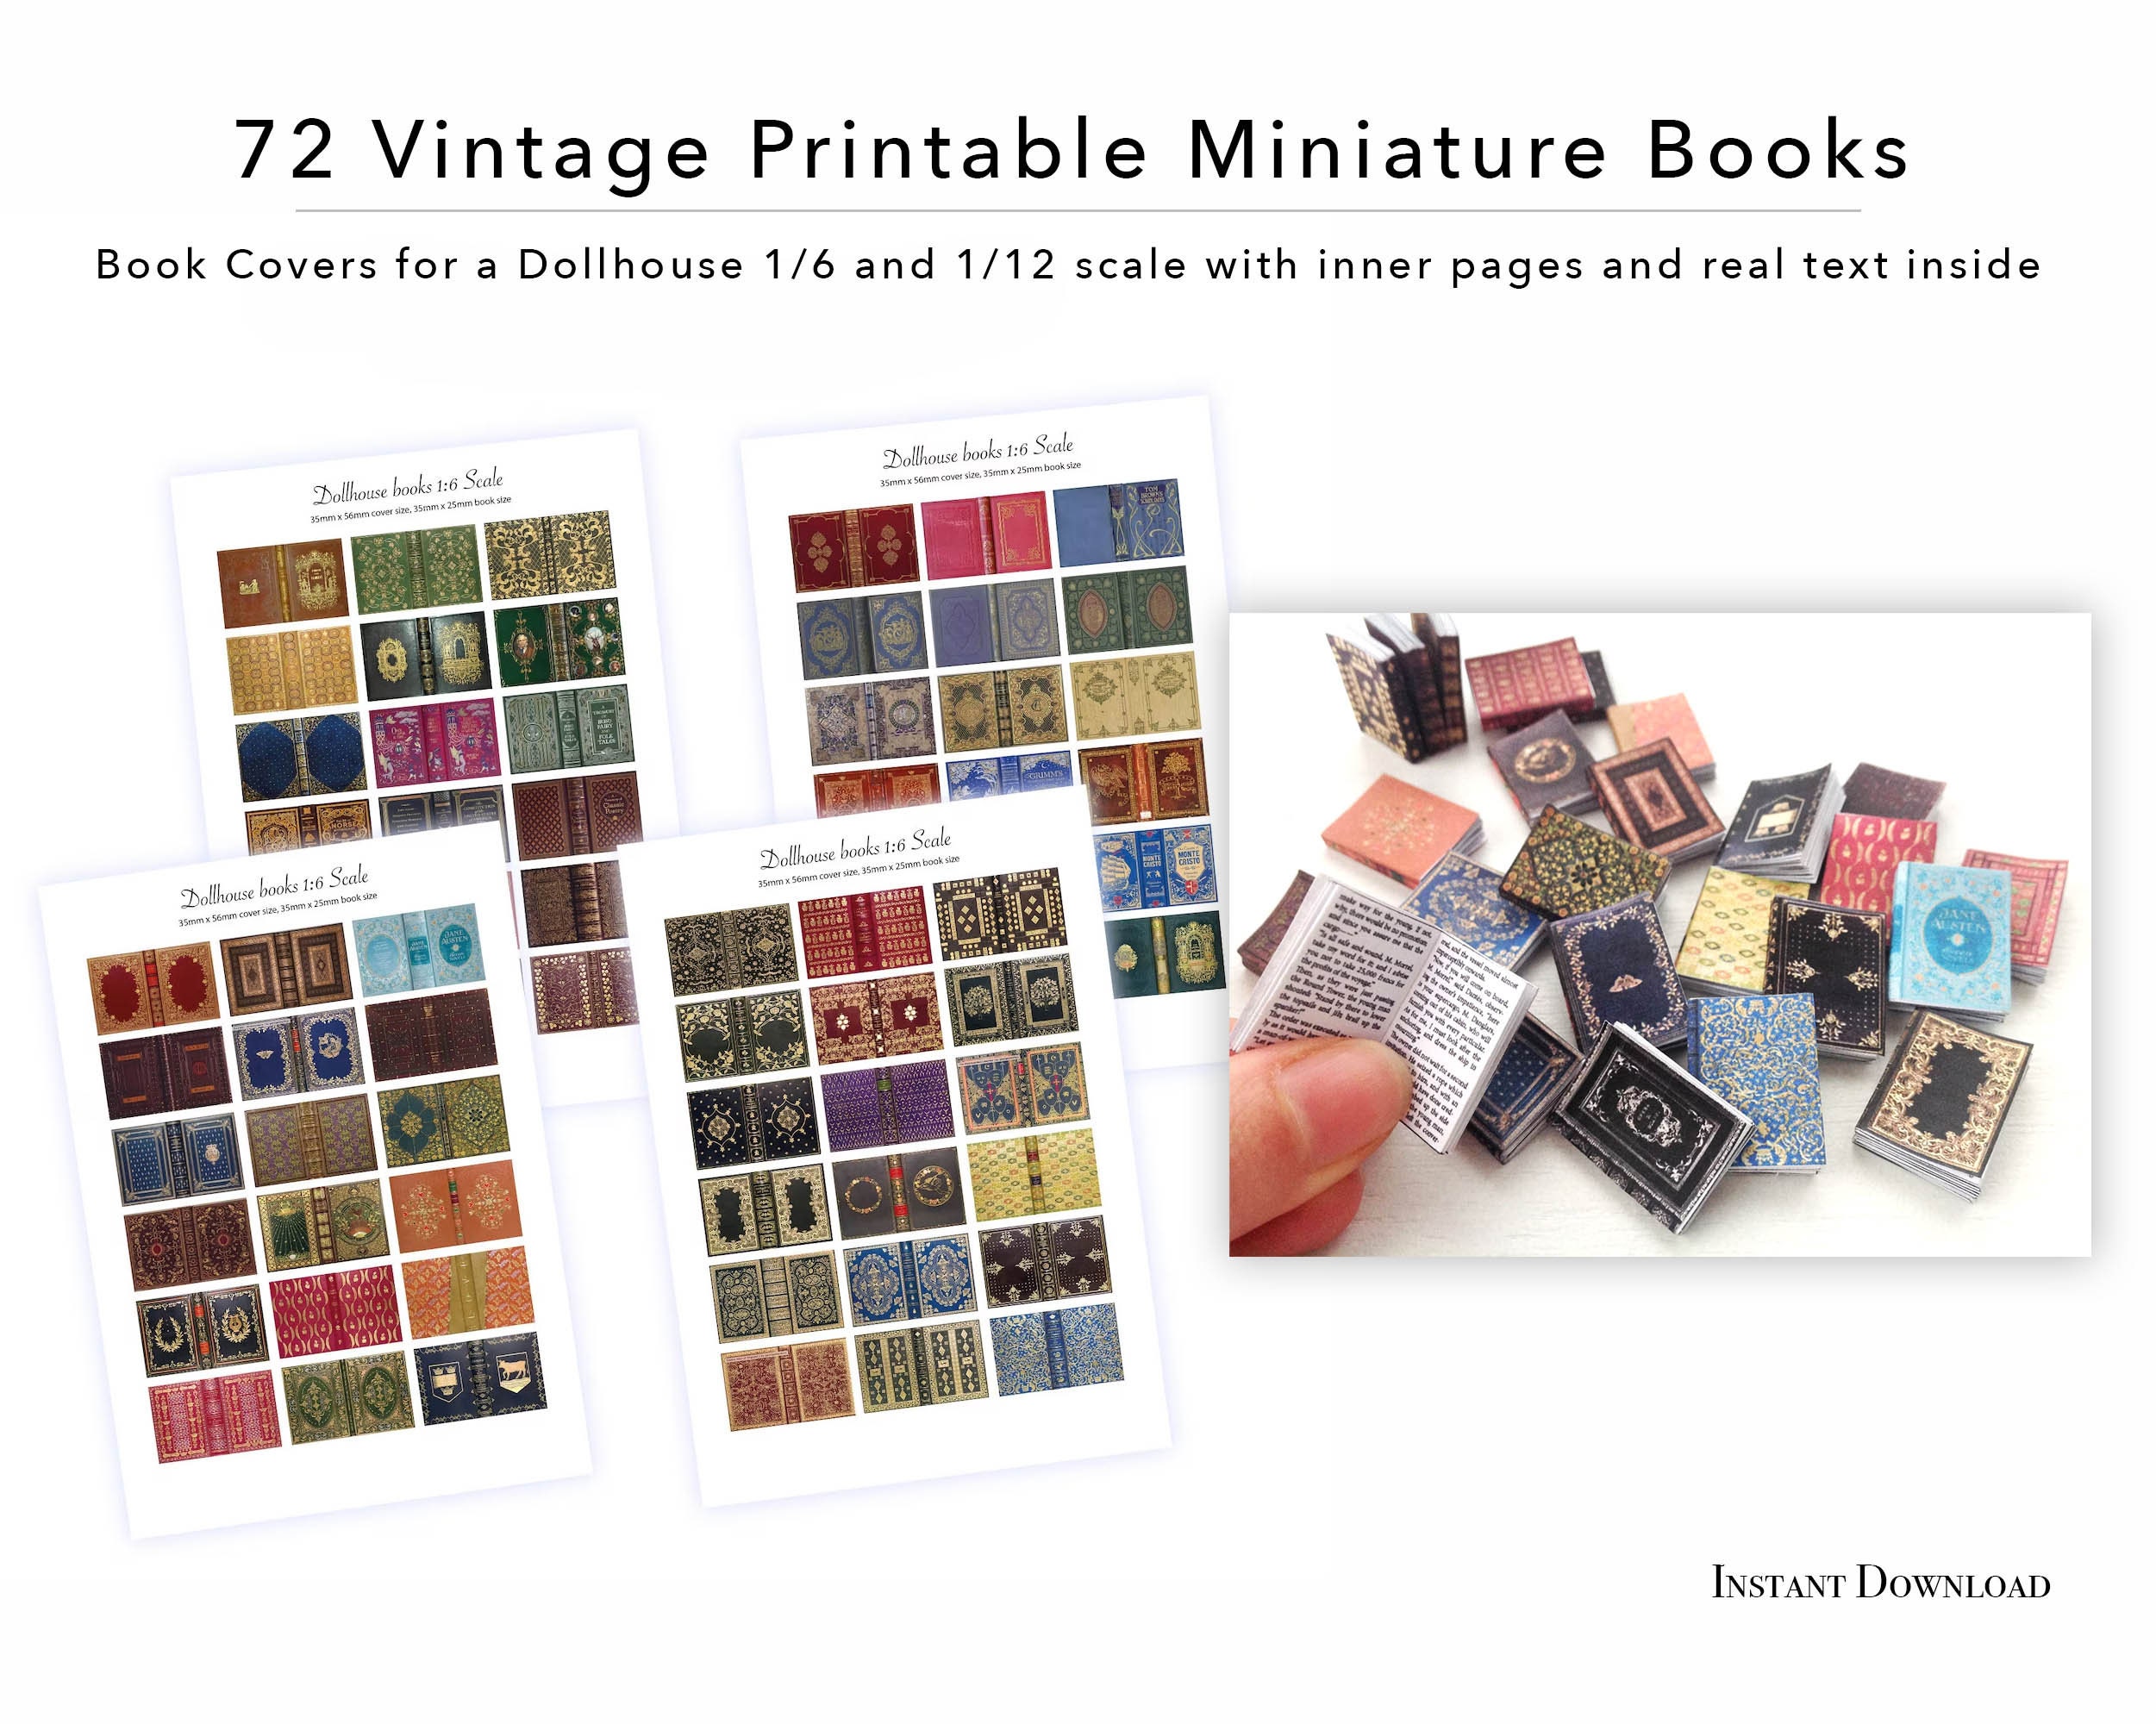 Miniature Books; The Format and Function of Tiny Religious Texts